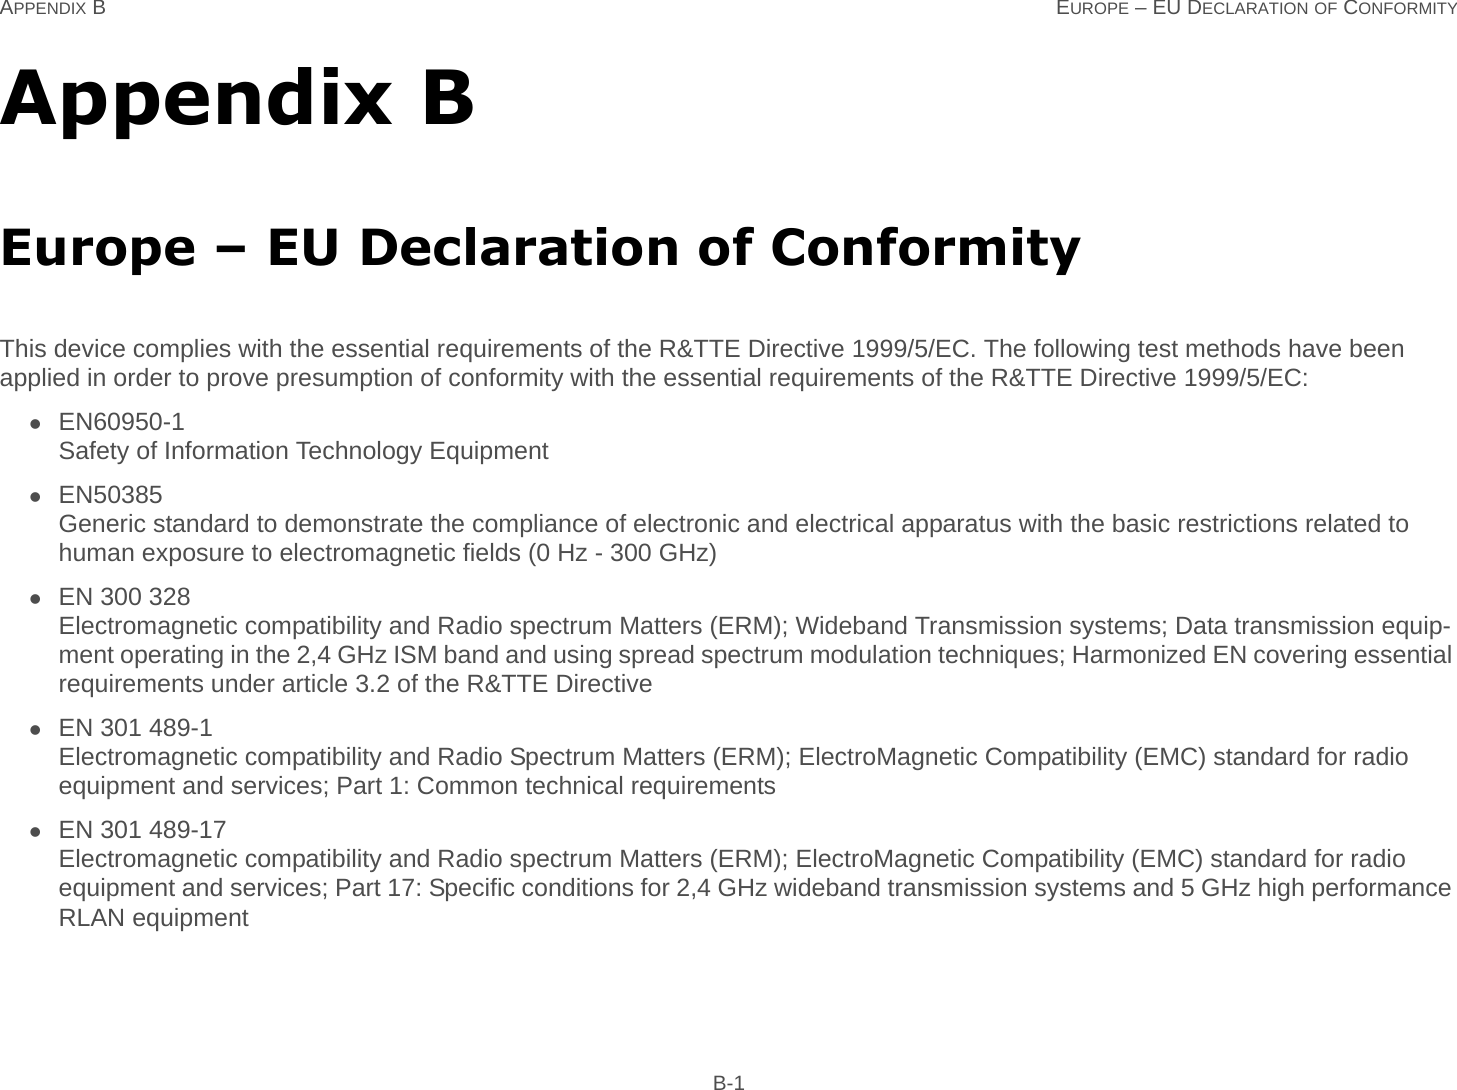 APPENDIX B EUROPE – EU DECLARATION OF CONFORMITY B-1Appendix BEurope – EU Declaration of ConformityThis device complies with the essential requirements of the R&amp;TTE Directive 1999/5/EC. The following test methods have been applied in order to prove presumption of conformity with the essential requirements of the R&amp;TTE Directive 1999/5/EC:EN60950-1Safety of Information Technology EquipmentEN50385Generic standard to demonstrate the compliance of electronic and electrical apparatus with the basic restrictions related to human exposure to electromagnetic fields (0 Hz - 300 GHz)EN 300 328Electromagnetic compatibility and Radio spectrum Matters (ERM); Wideband Transmission systems; Data transmission equip-ment operating in the 2,4 GHz ISM band and using spread spectrum modulation techniques; Harmonized EN covering essential requirements under article 3.2 of the R&amp;TTE DirectiveEN 301 489-1Electromagnetic compatibility and Radio Spectrum Matters (ERM); ElectroMagnetic Compatibility (EMC) standard for radio equipment and services; Part 1: Common technical requirementsEN 301 489-17Electromagnetic compatibility and Radio spectrum Matters (ERM); ElectroMagnetic Compatibility (EMC) standard for radio equipment and services; Part 17: Specific conditions for 2,4 GHz wideband transmission systems and 5 GHz high performance RLAN equipment